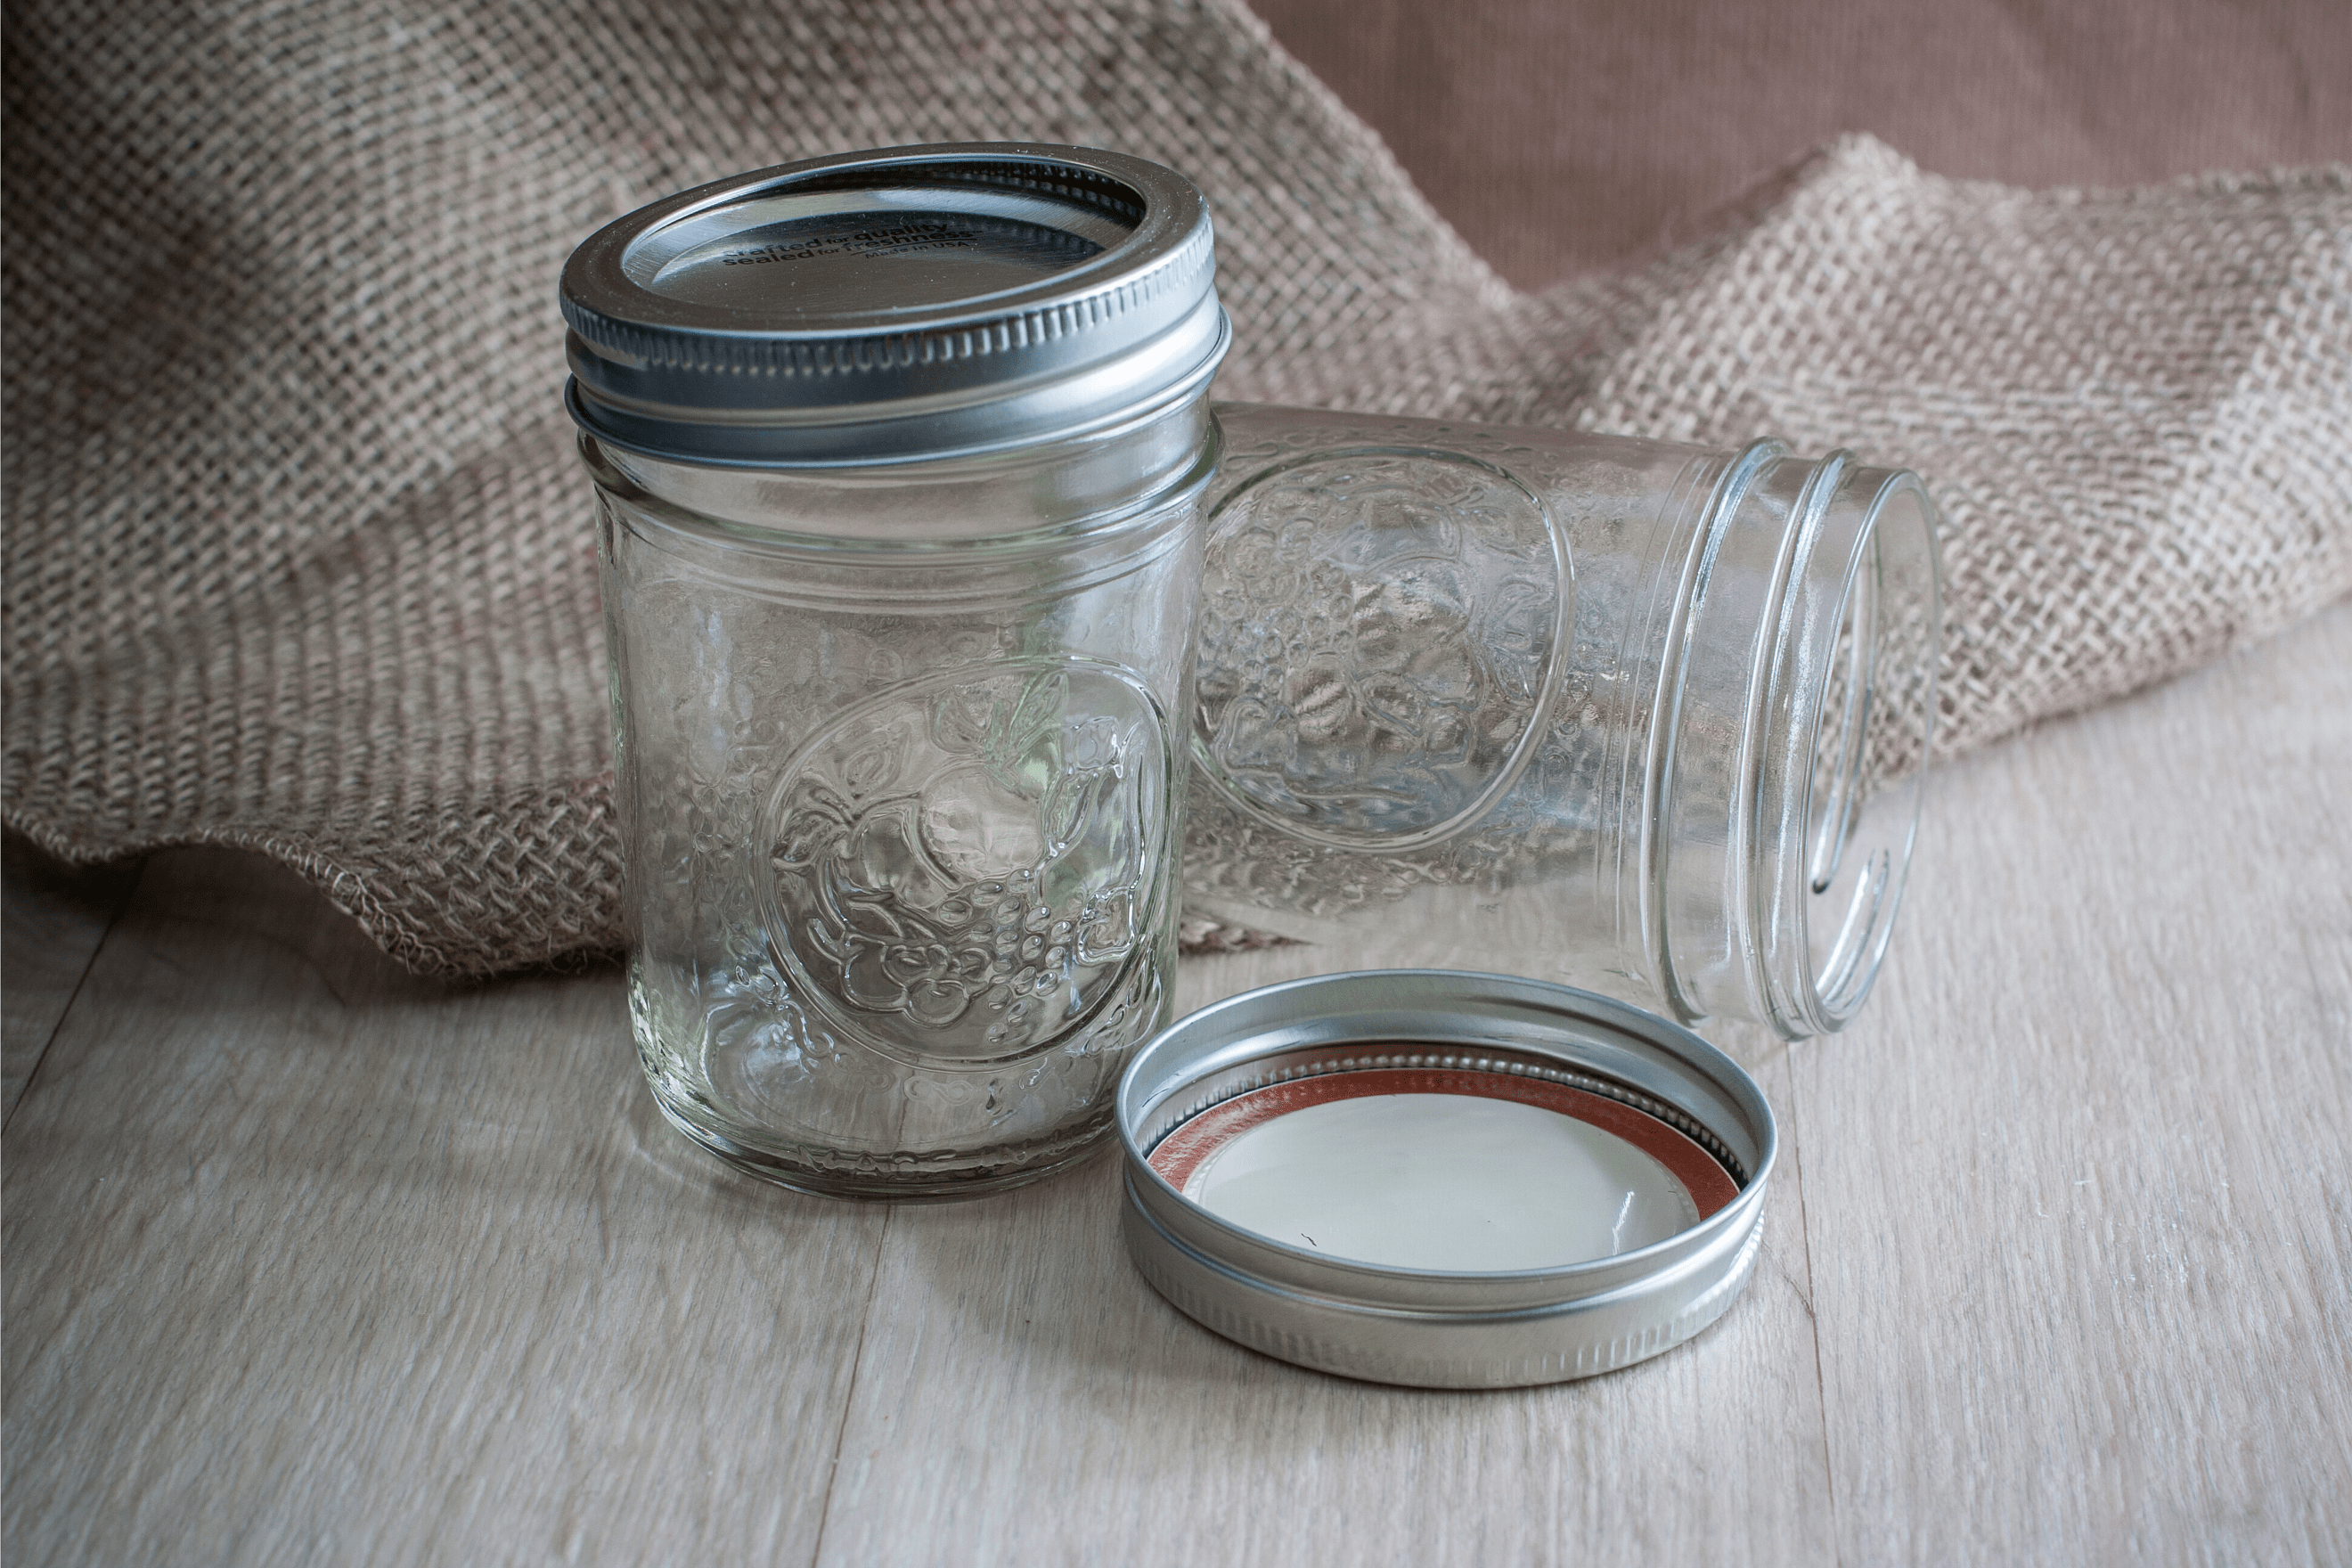 https://treadingmyownpath.com/wp-content/uploads/2020/05/How-to-freeze-food-in-glass-jars-defrost-food-in-glass-less-waste-kitchen-min.png